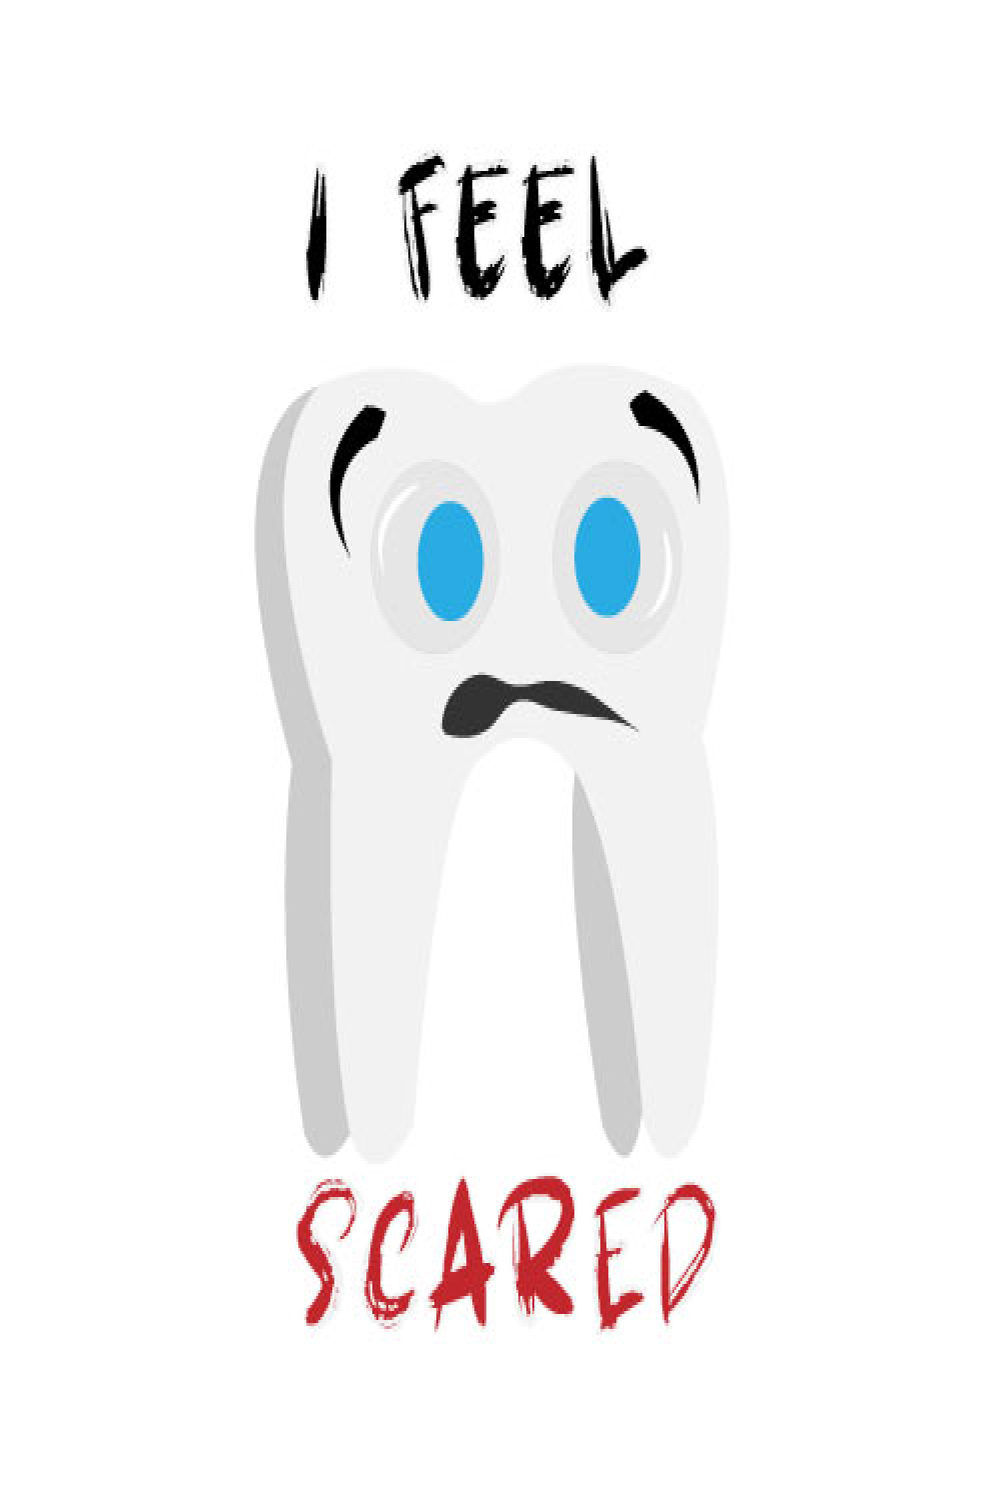 Scared Teeth - TShirt Design pinterest preview image.